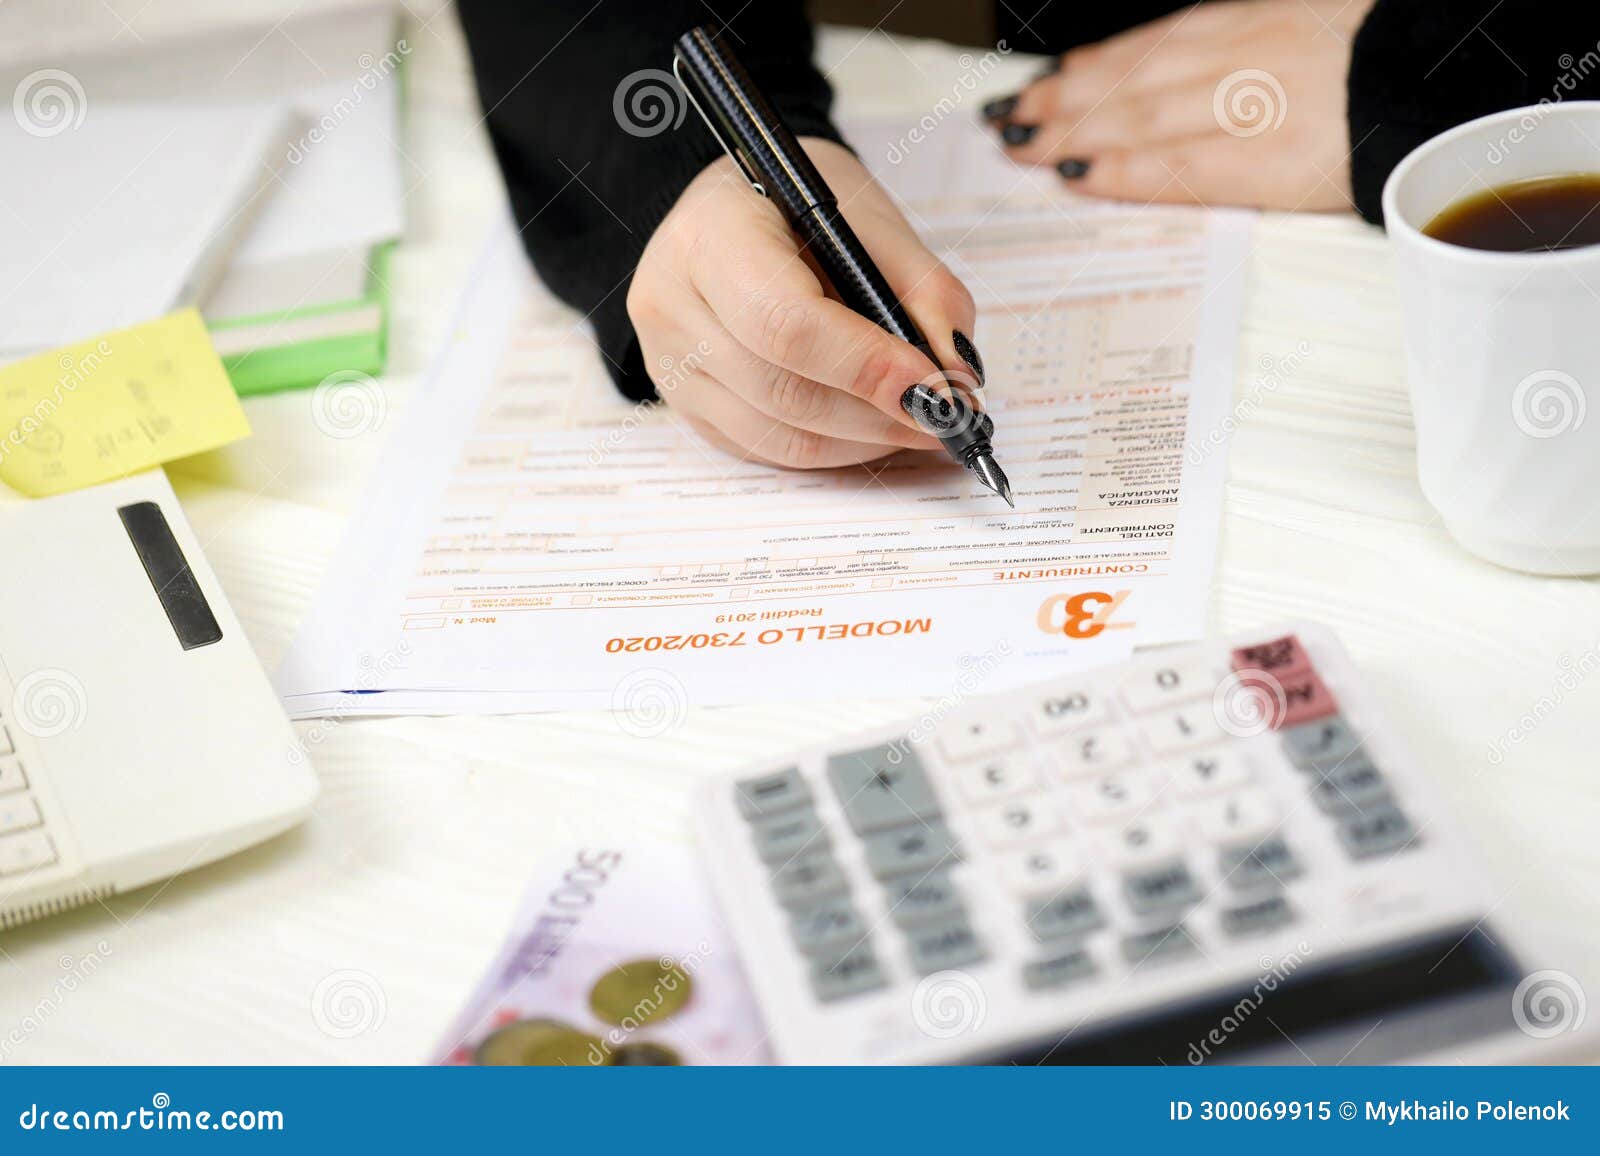 accountant fill italian tax form modello 730 individual income tax return in end of tax period. taxation and paperwork